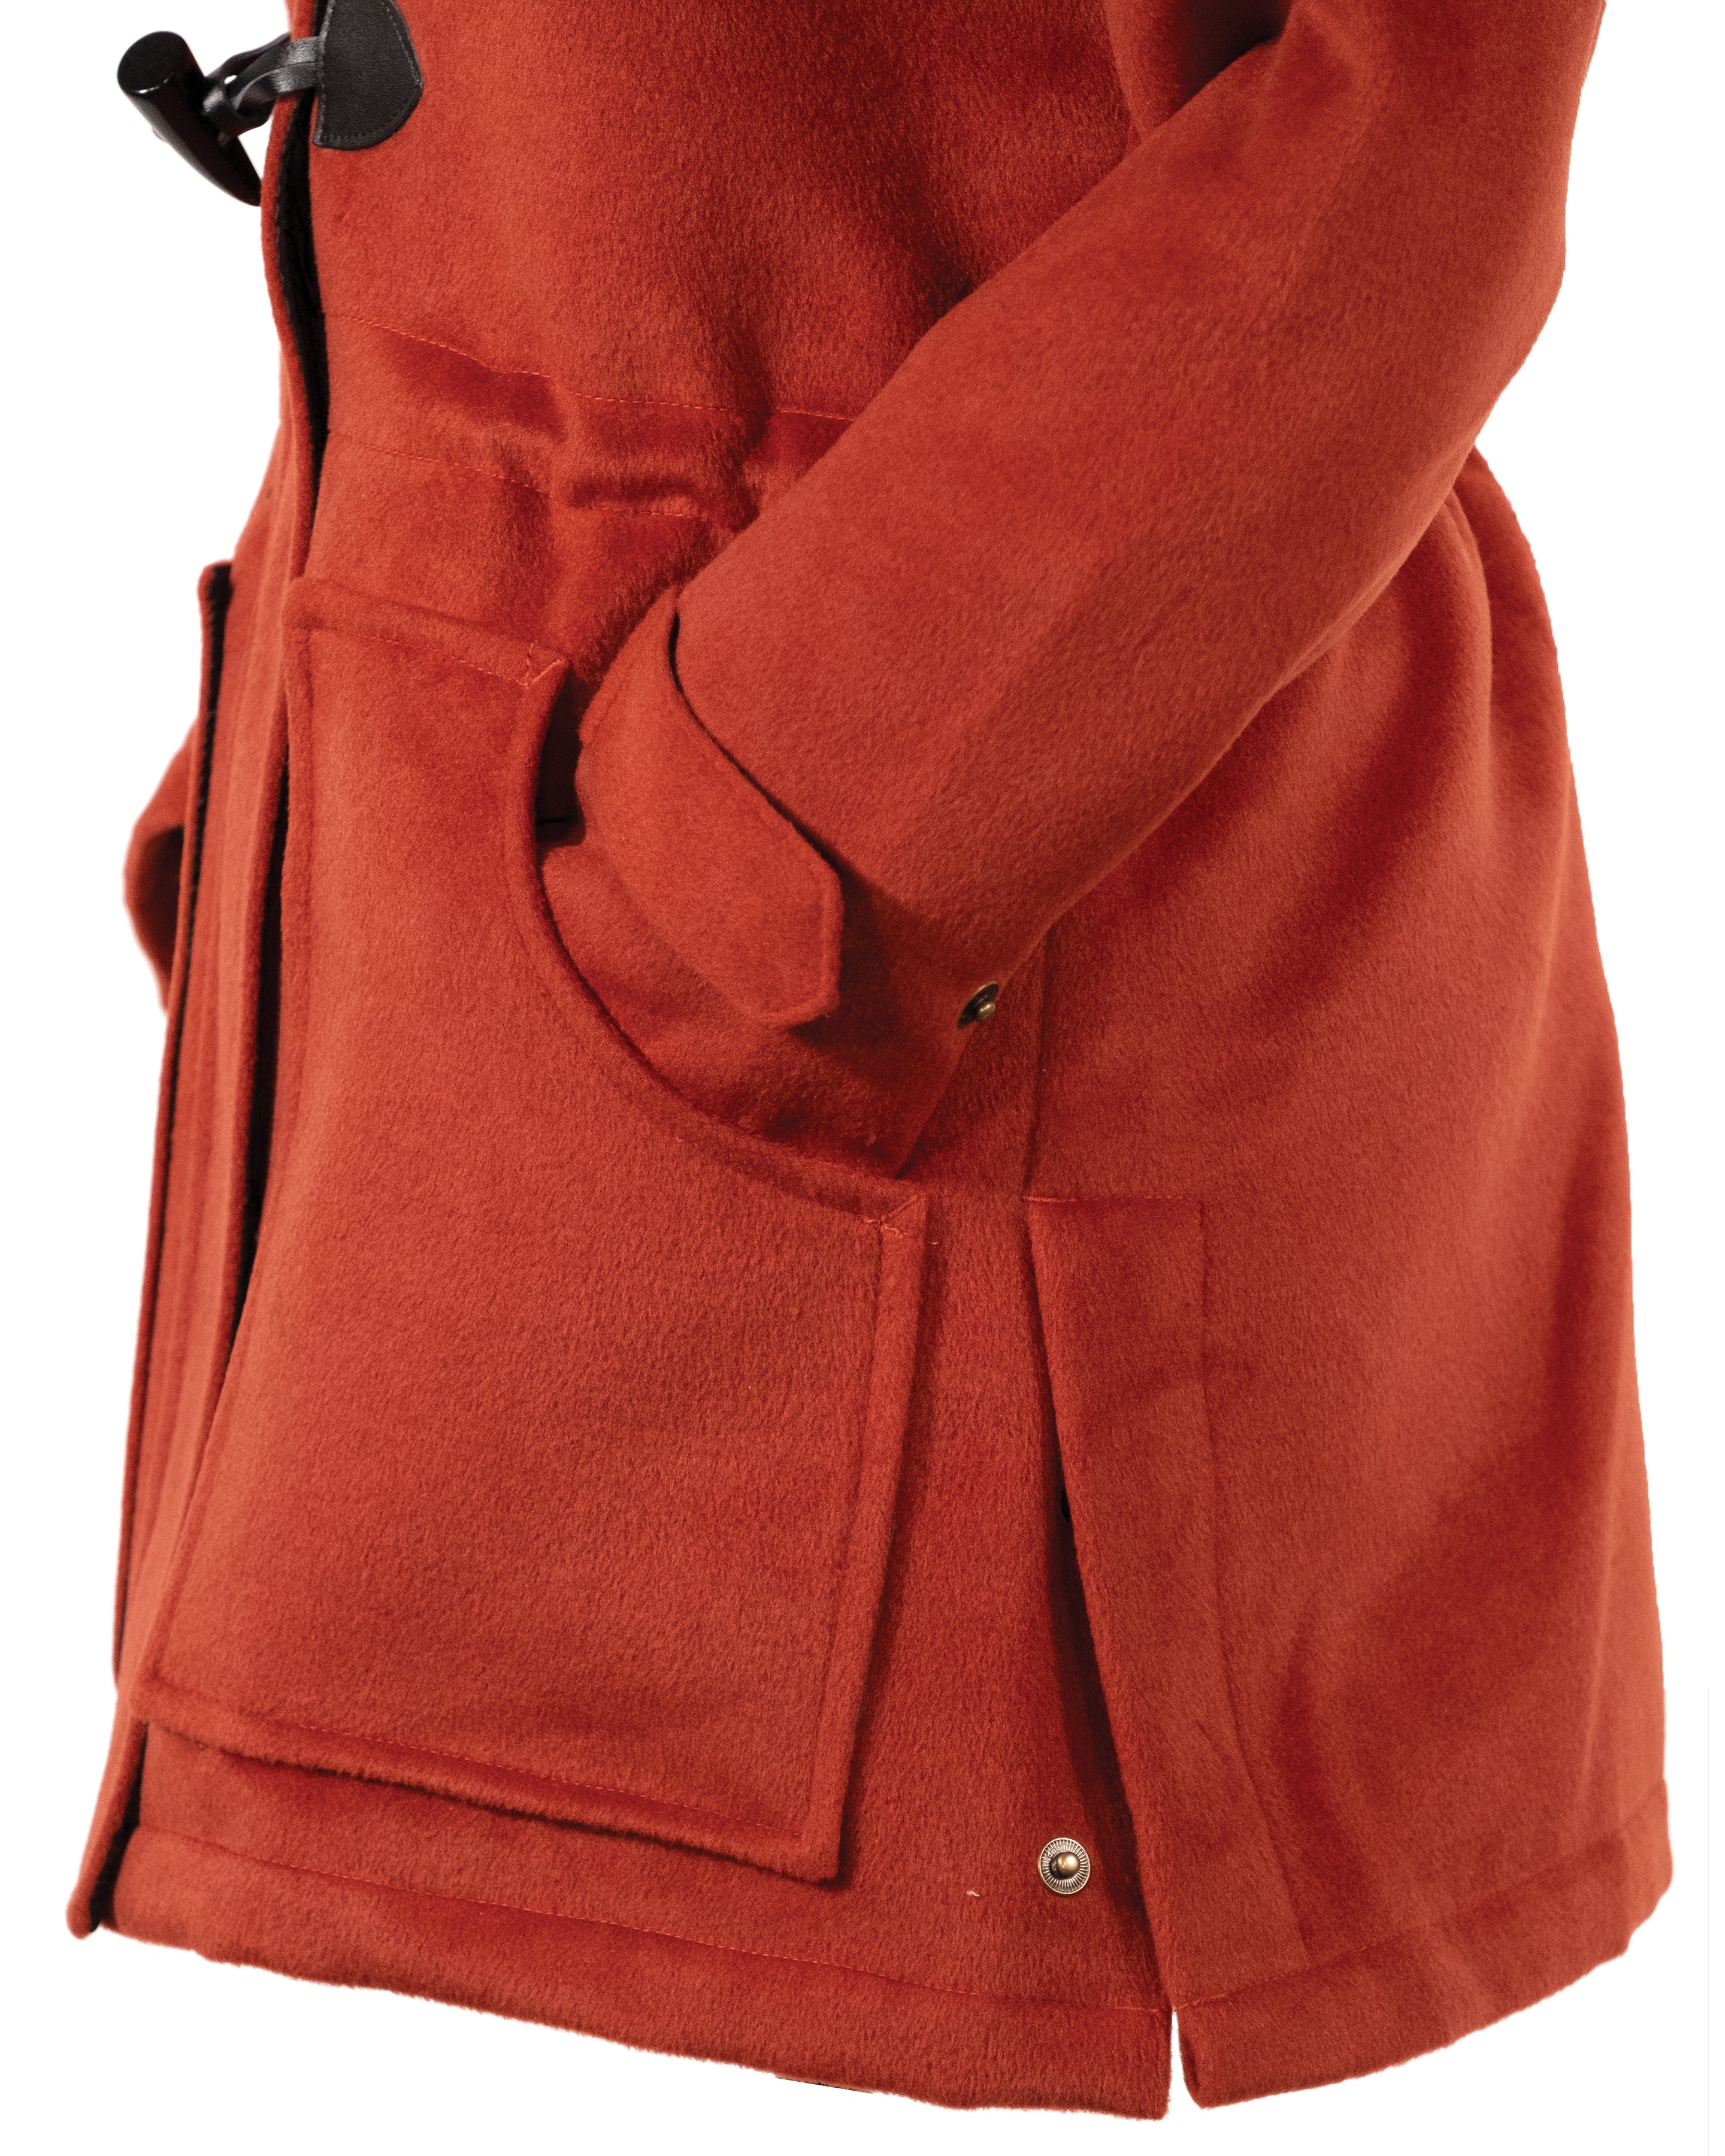 Outback Traders Josephine Jacket